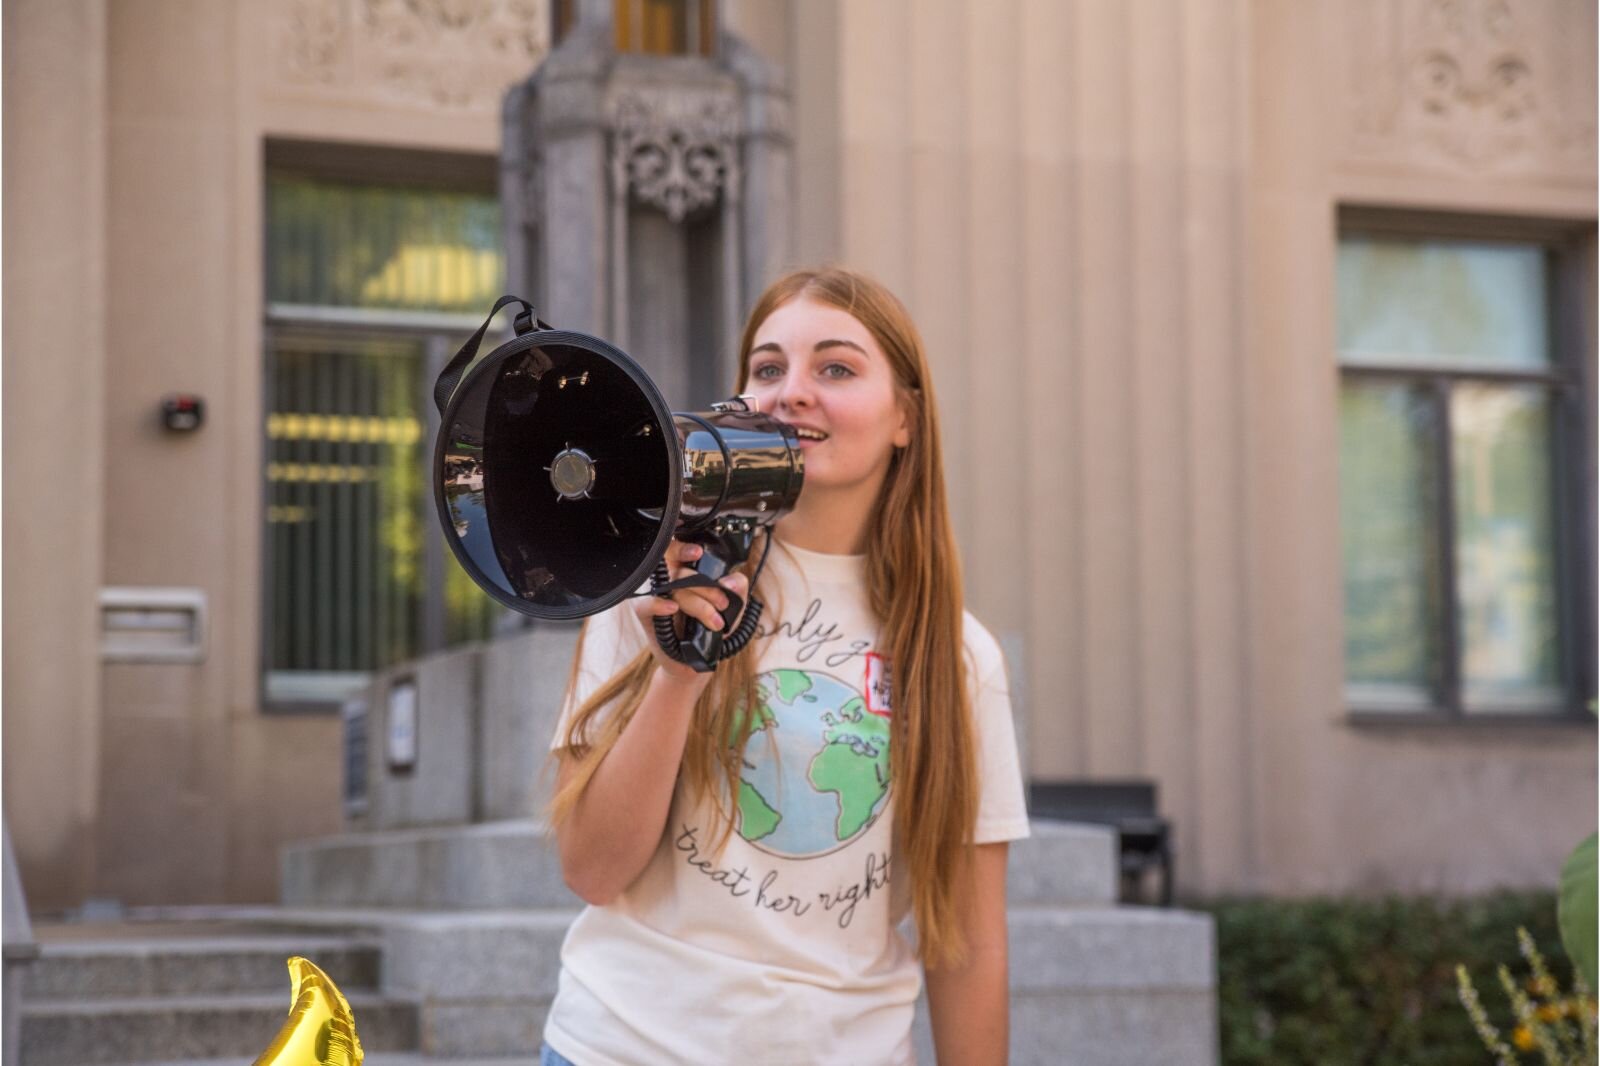 Mia Breznau, a senior at Mattawan High School and one of the organizers, speaks to the crowd at the Youth Climate Strike.